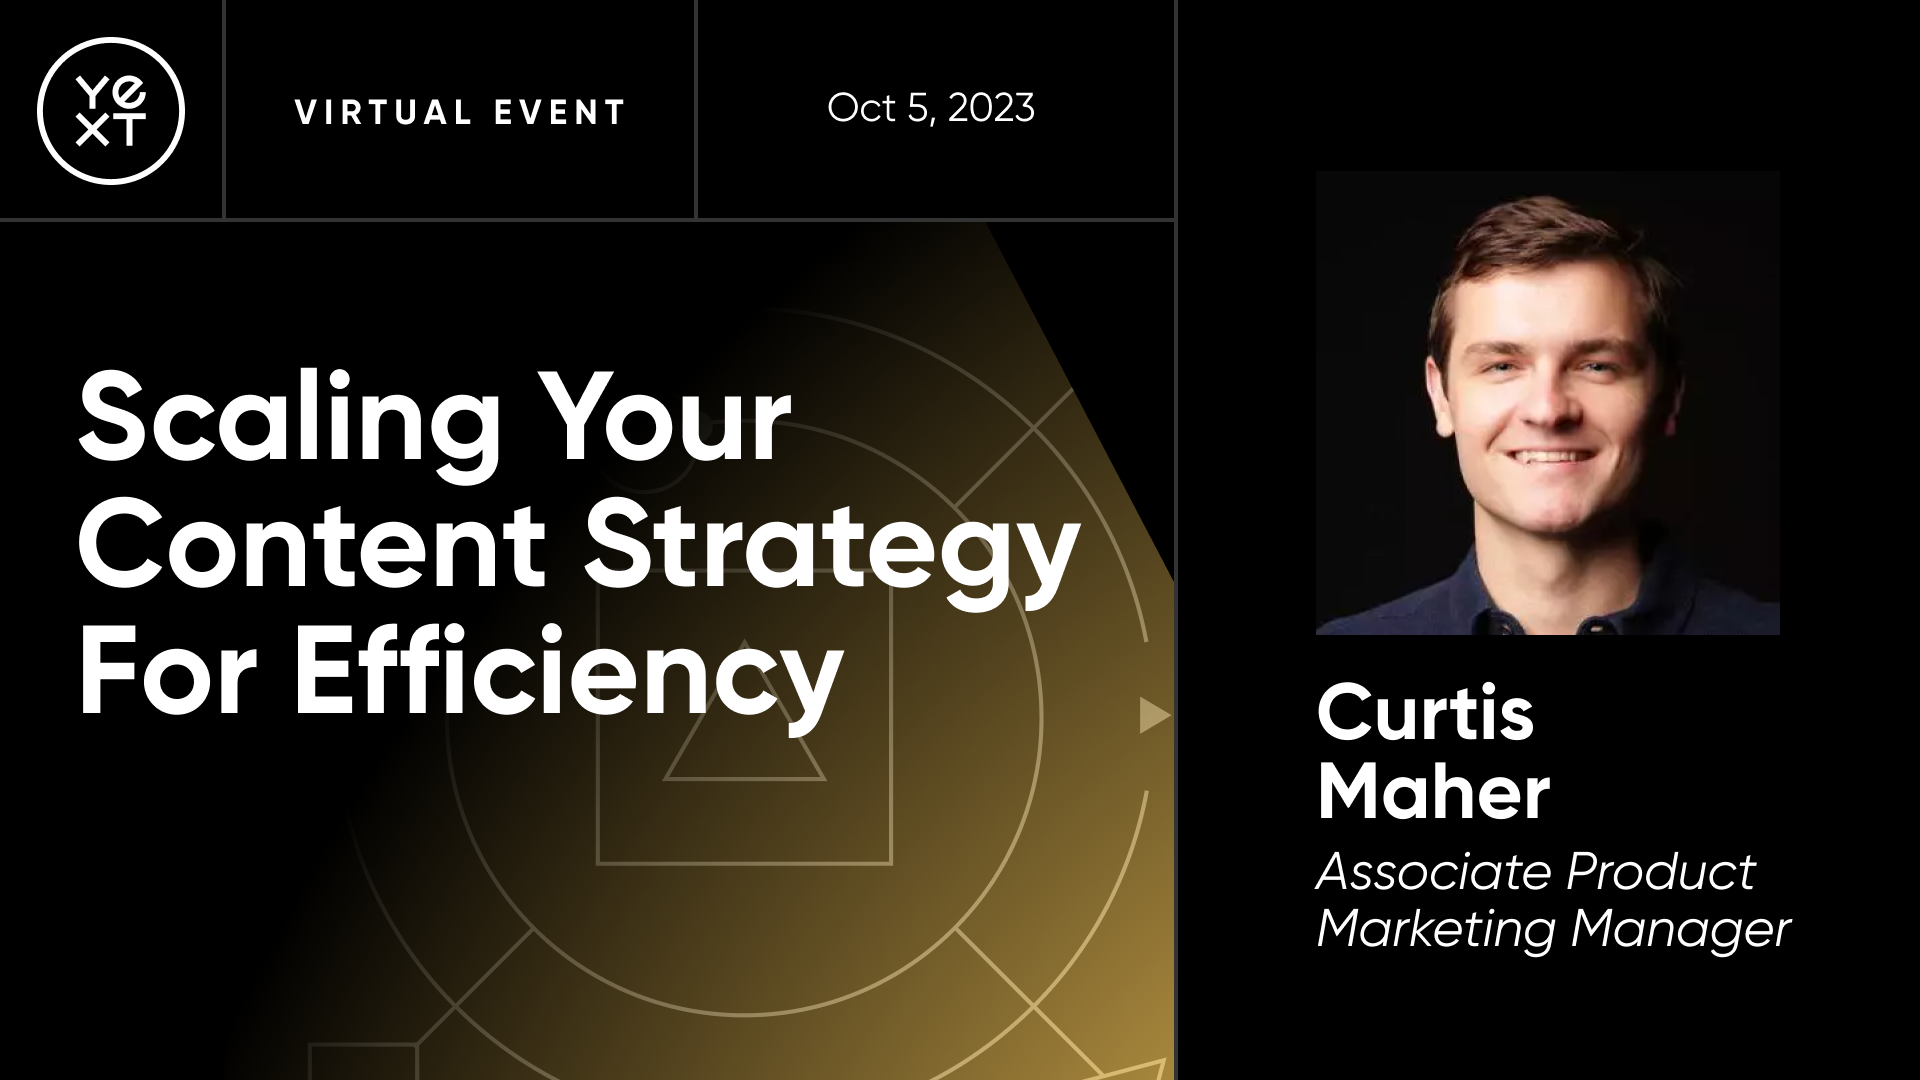 Scaling your content strategy for efficiency webinar with Curtis Maher